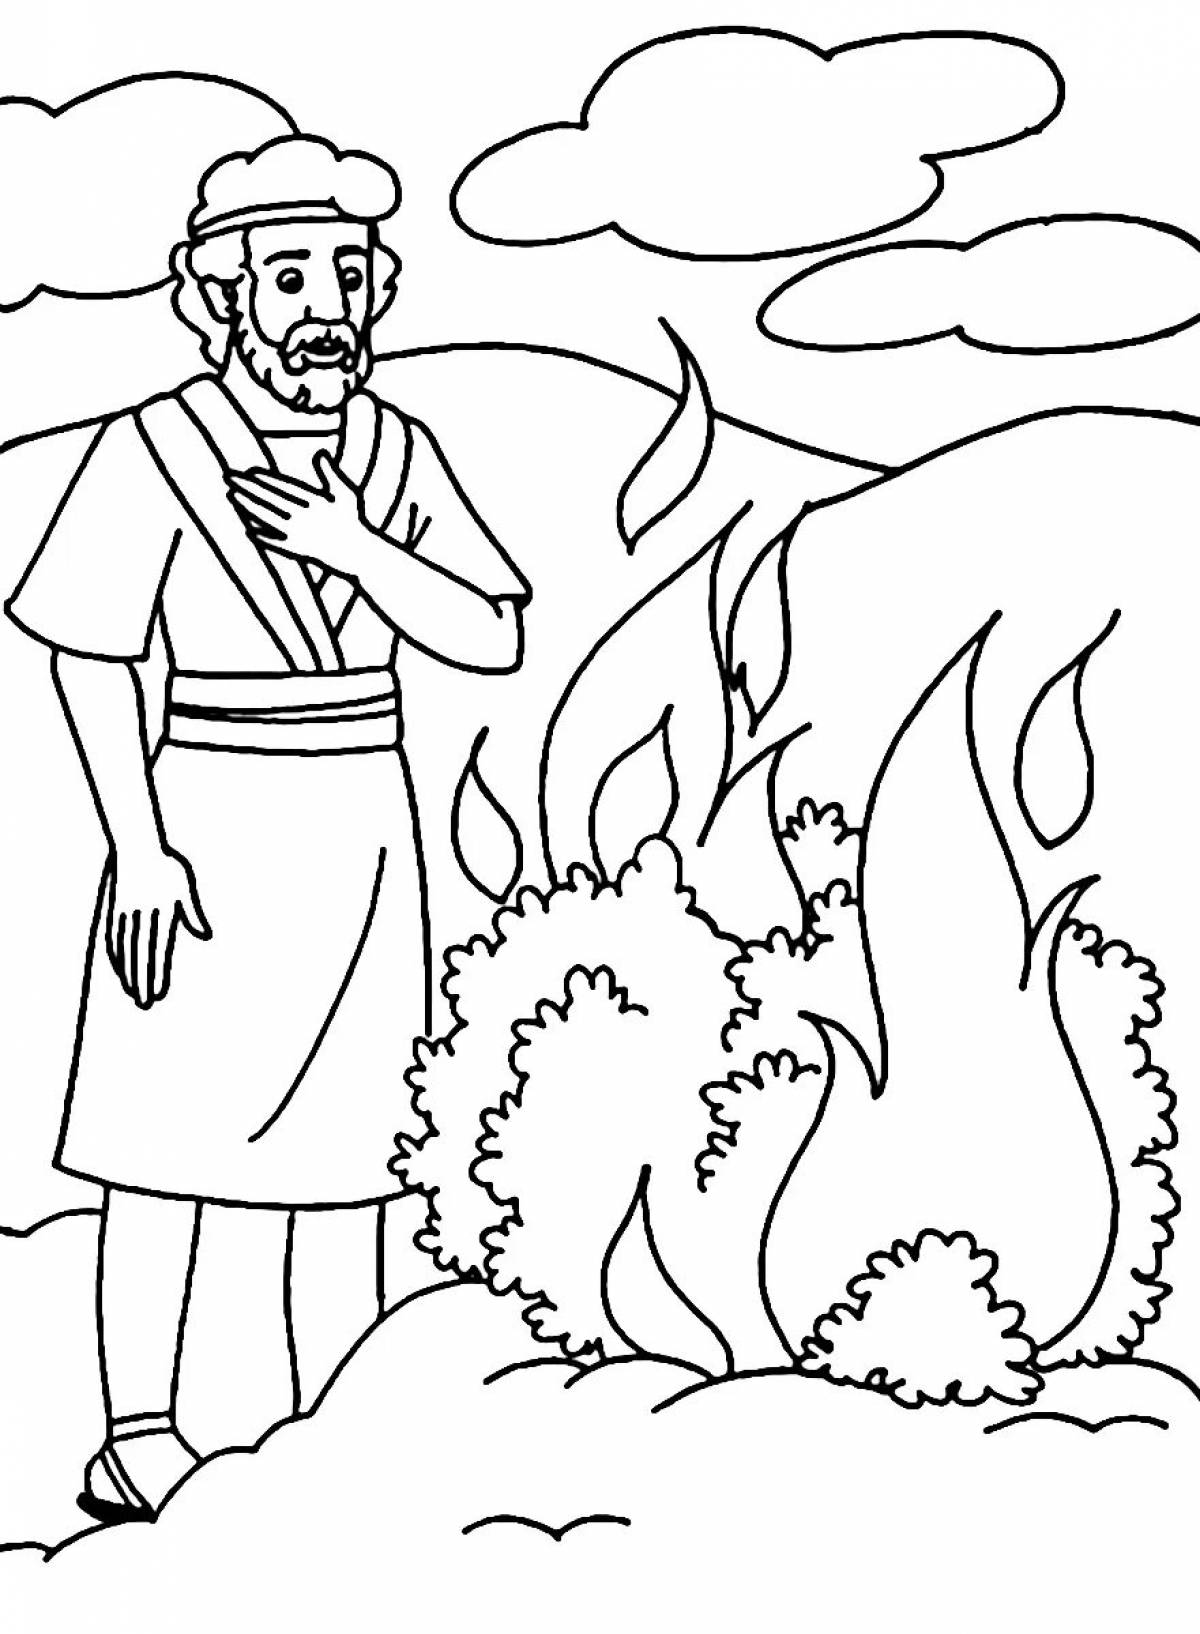 Glitzy burning bush coloring book for beginners